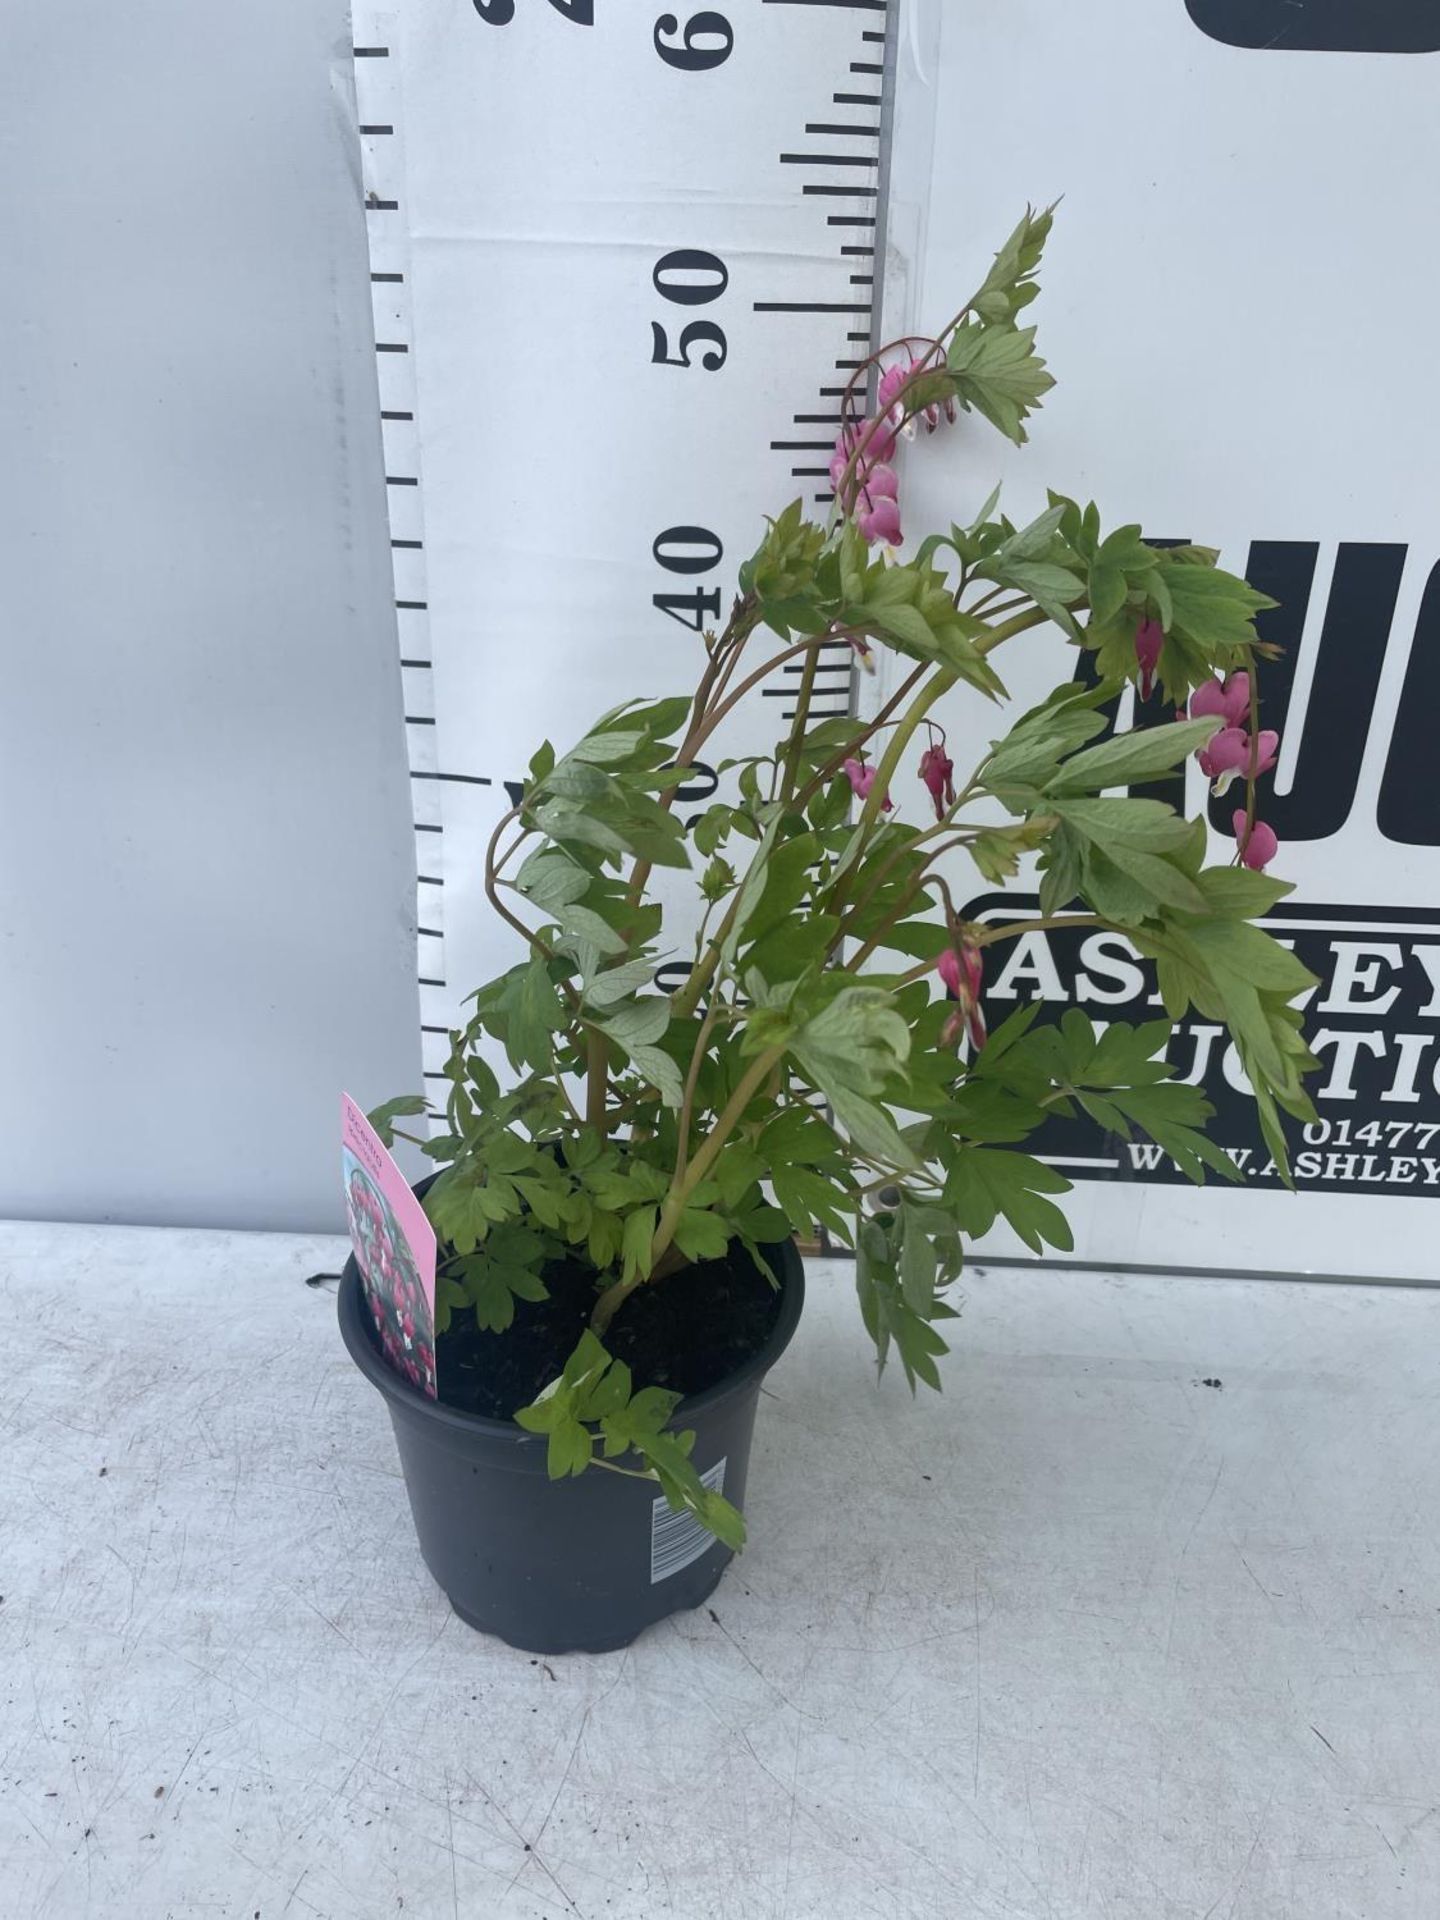 SIX DICENTRA SPECTABILIS BLEEDING HEART 50CM TALL IN 2 LTR POTS TO BE SOLD FOR THE SIX PLUS VAT - Image 3 of 9